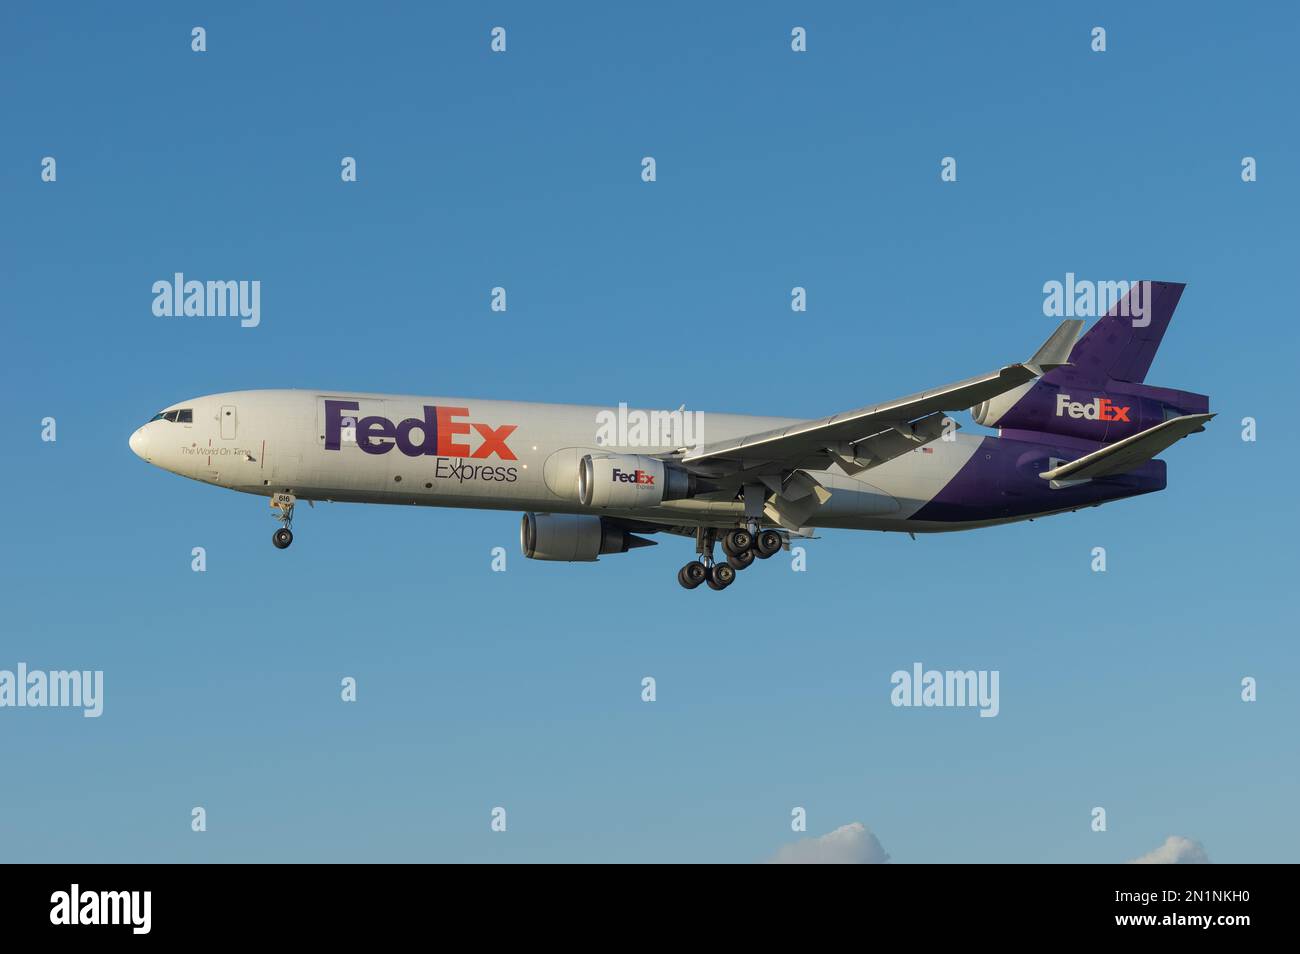 Los Angeles, California, United States - February 5, 2023: FedEx Express 1995 McDonnell Douglas MD-11 aircraft with registration N616FE shown approach Stock Photo